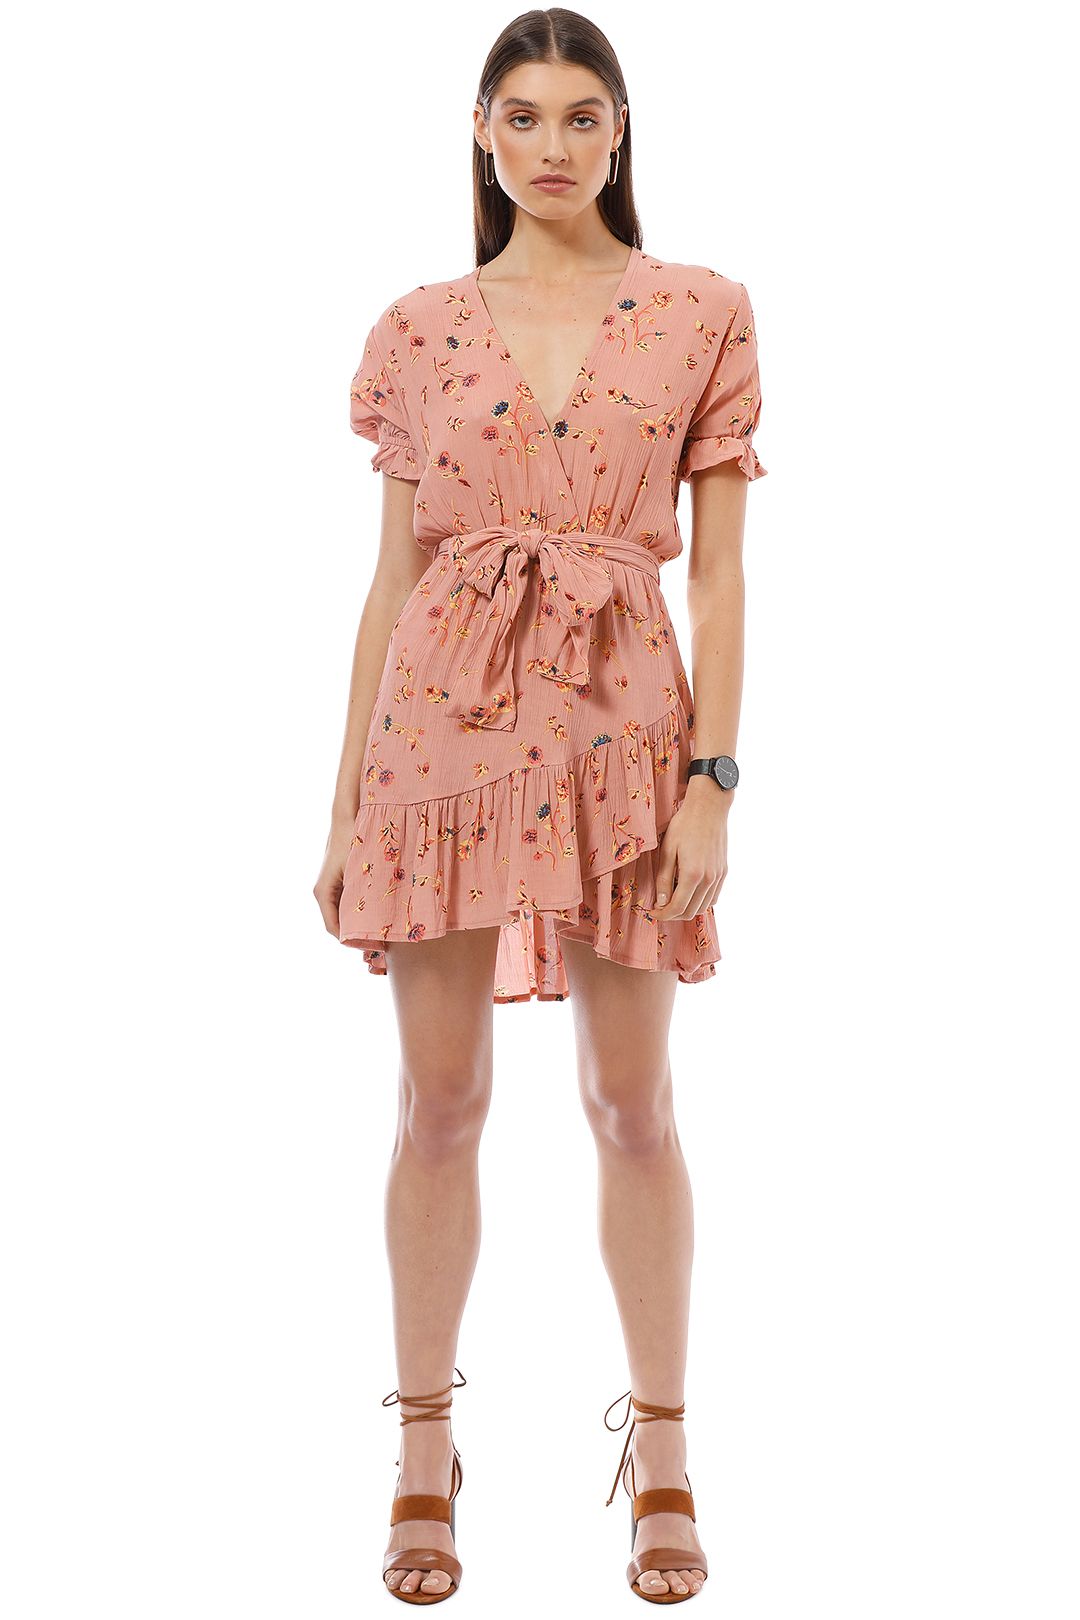 Faithfull the Brand - Le Moulin Dress - Pink Print - Front